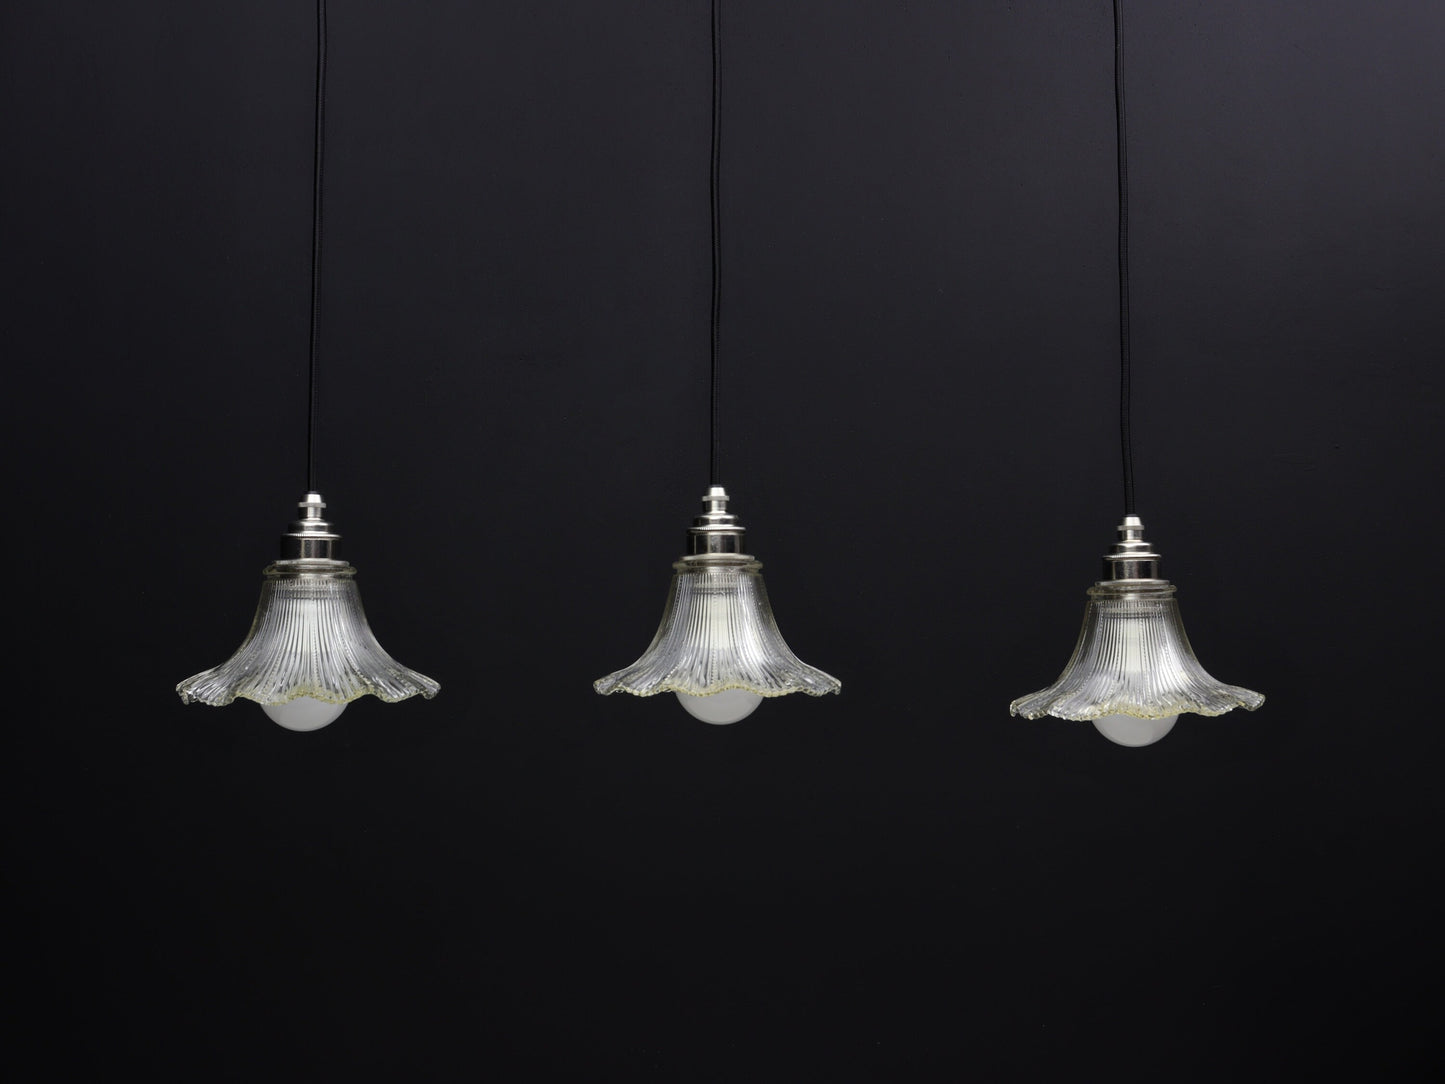 Stylish Modern Pendant Lights from Antique Glass Shades | Antique Lighting Fixtures